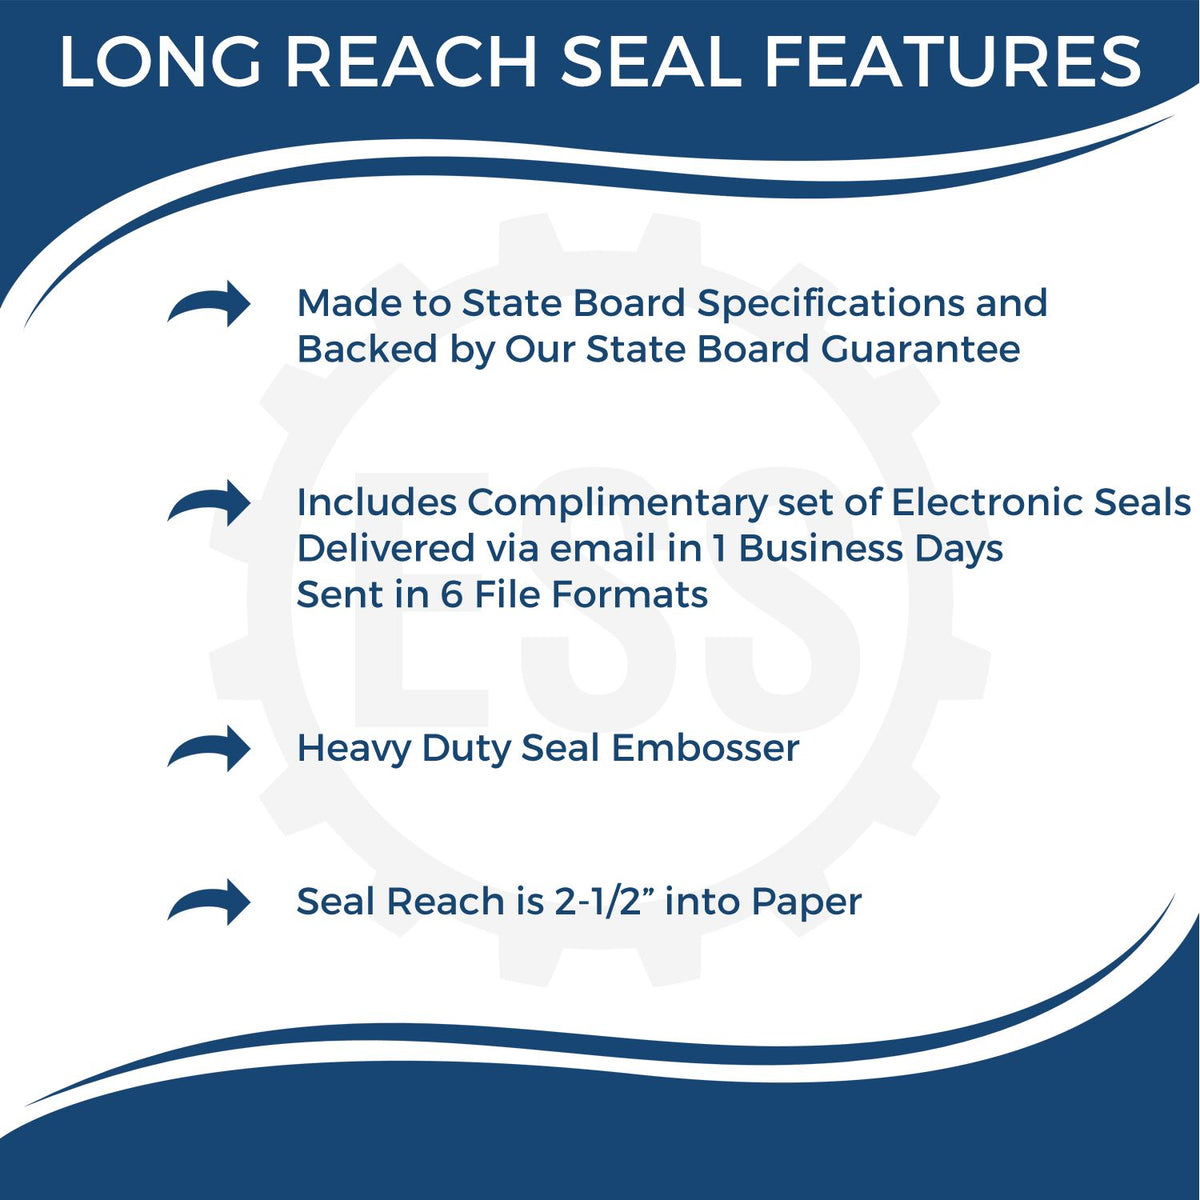 A picture of an infographic highlighting the selling points for the Long Reach New York PE Seal